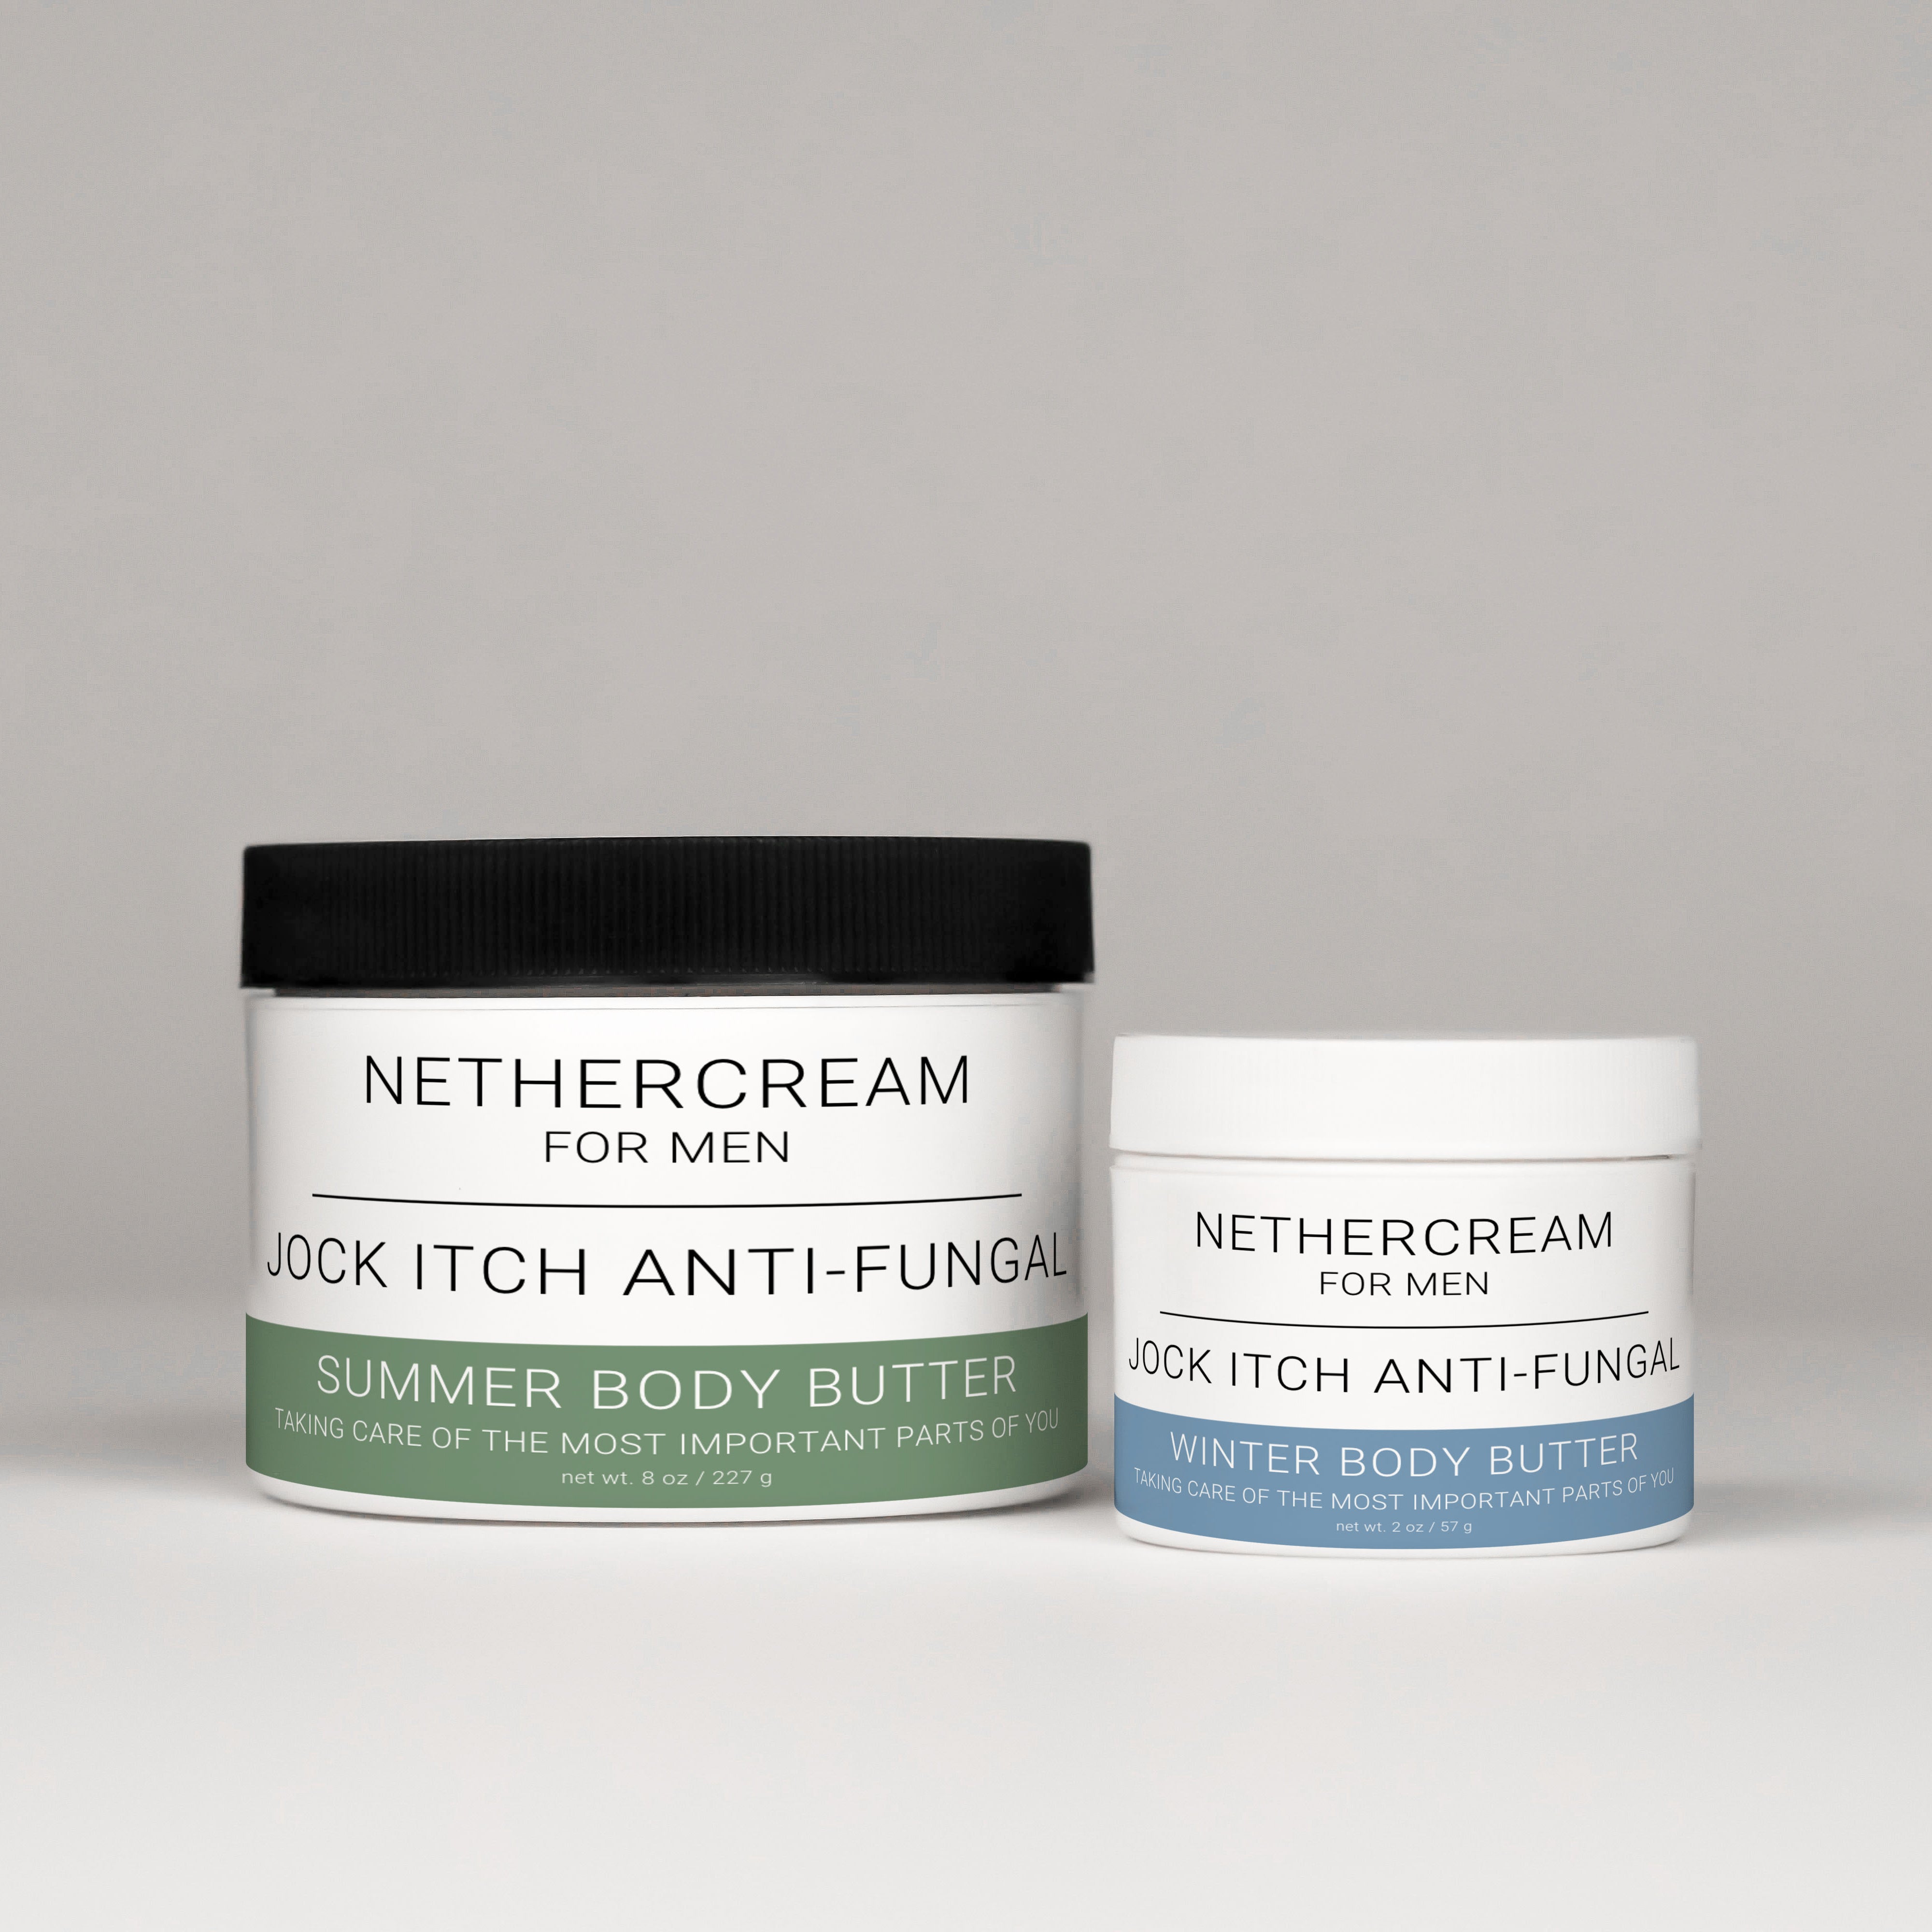 The Best Creams for Jock Itch, According to Dermatologists